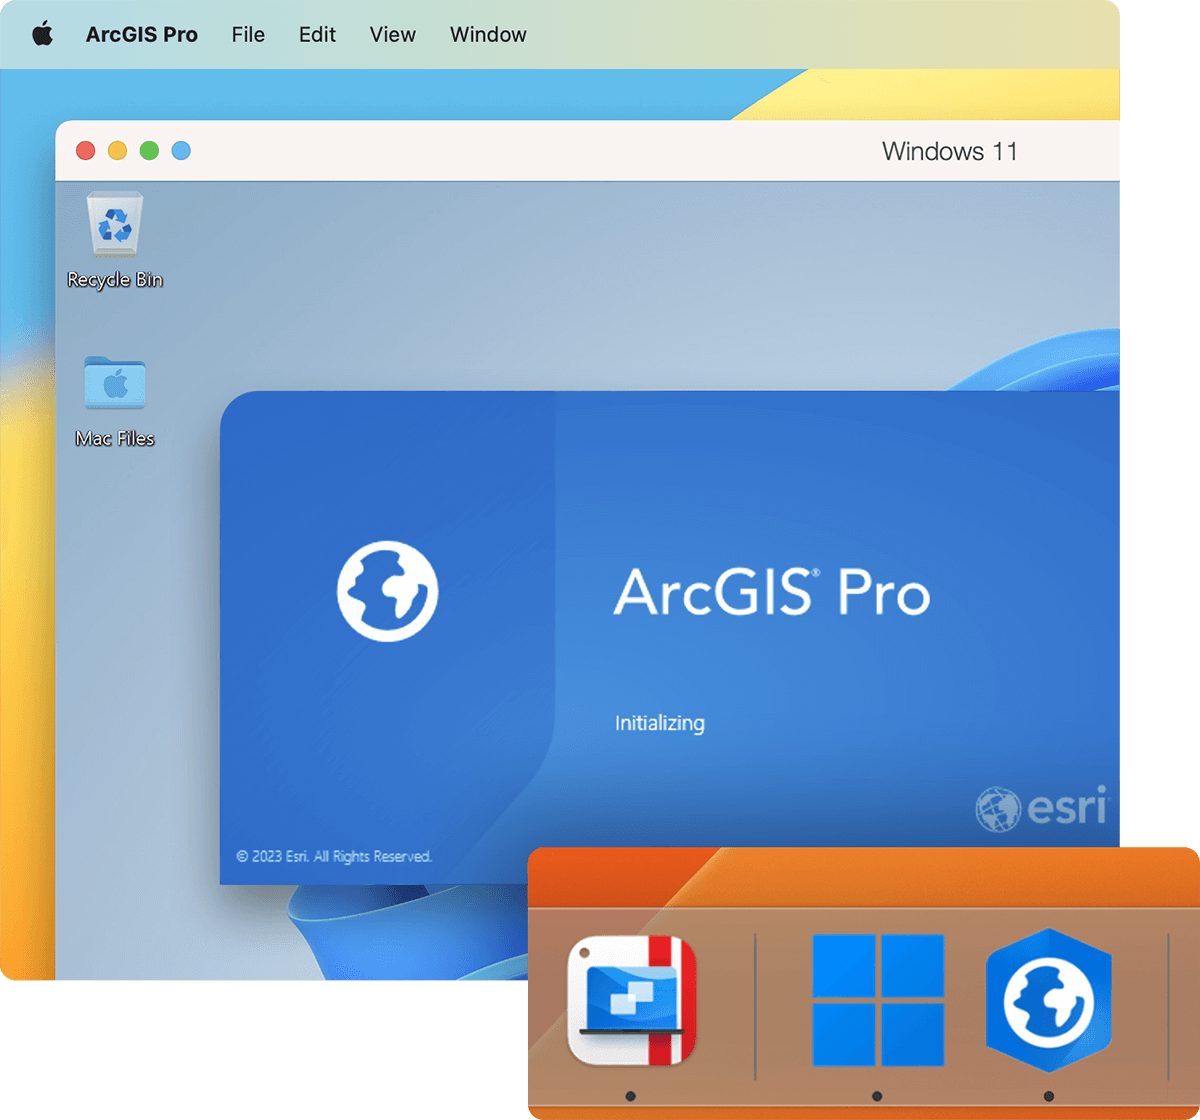 Run ArcGIS Pro, ArcMap, and other geographic information system (GIS) software for creating, analyzing, visualizing, and sharing spatial data